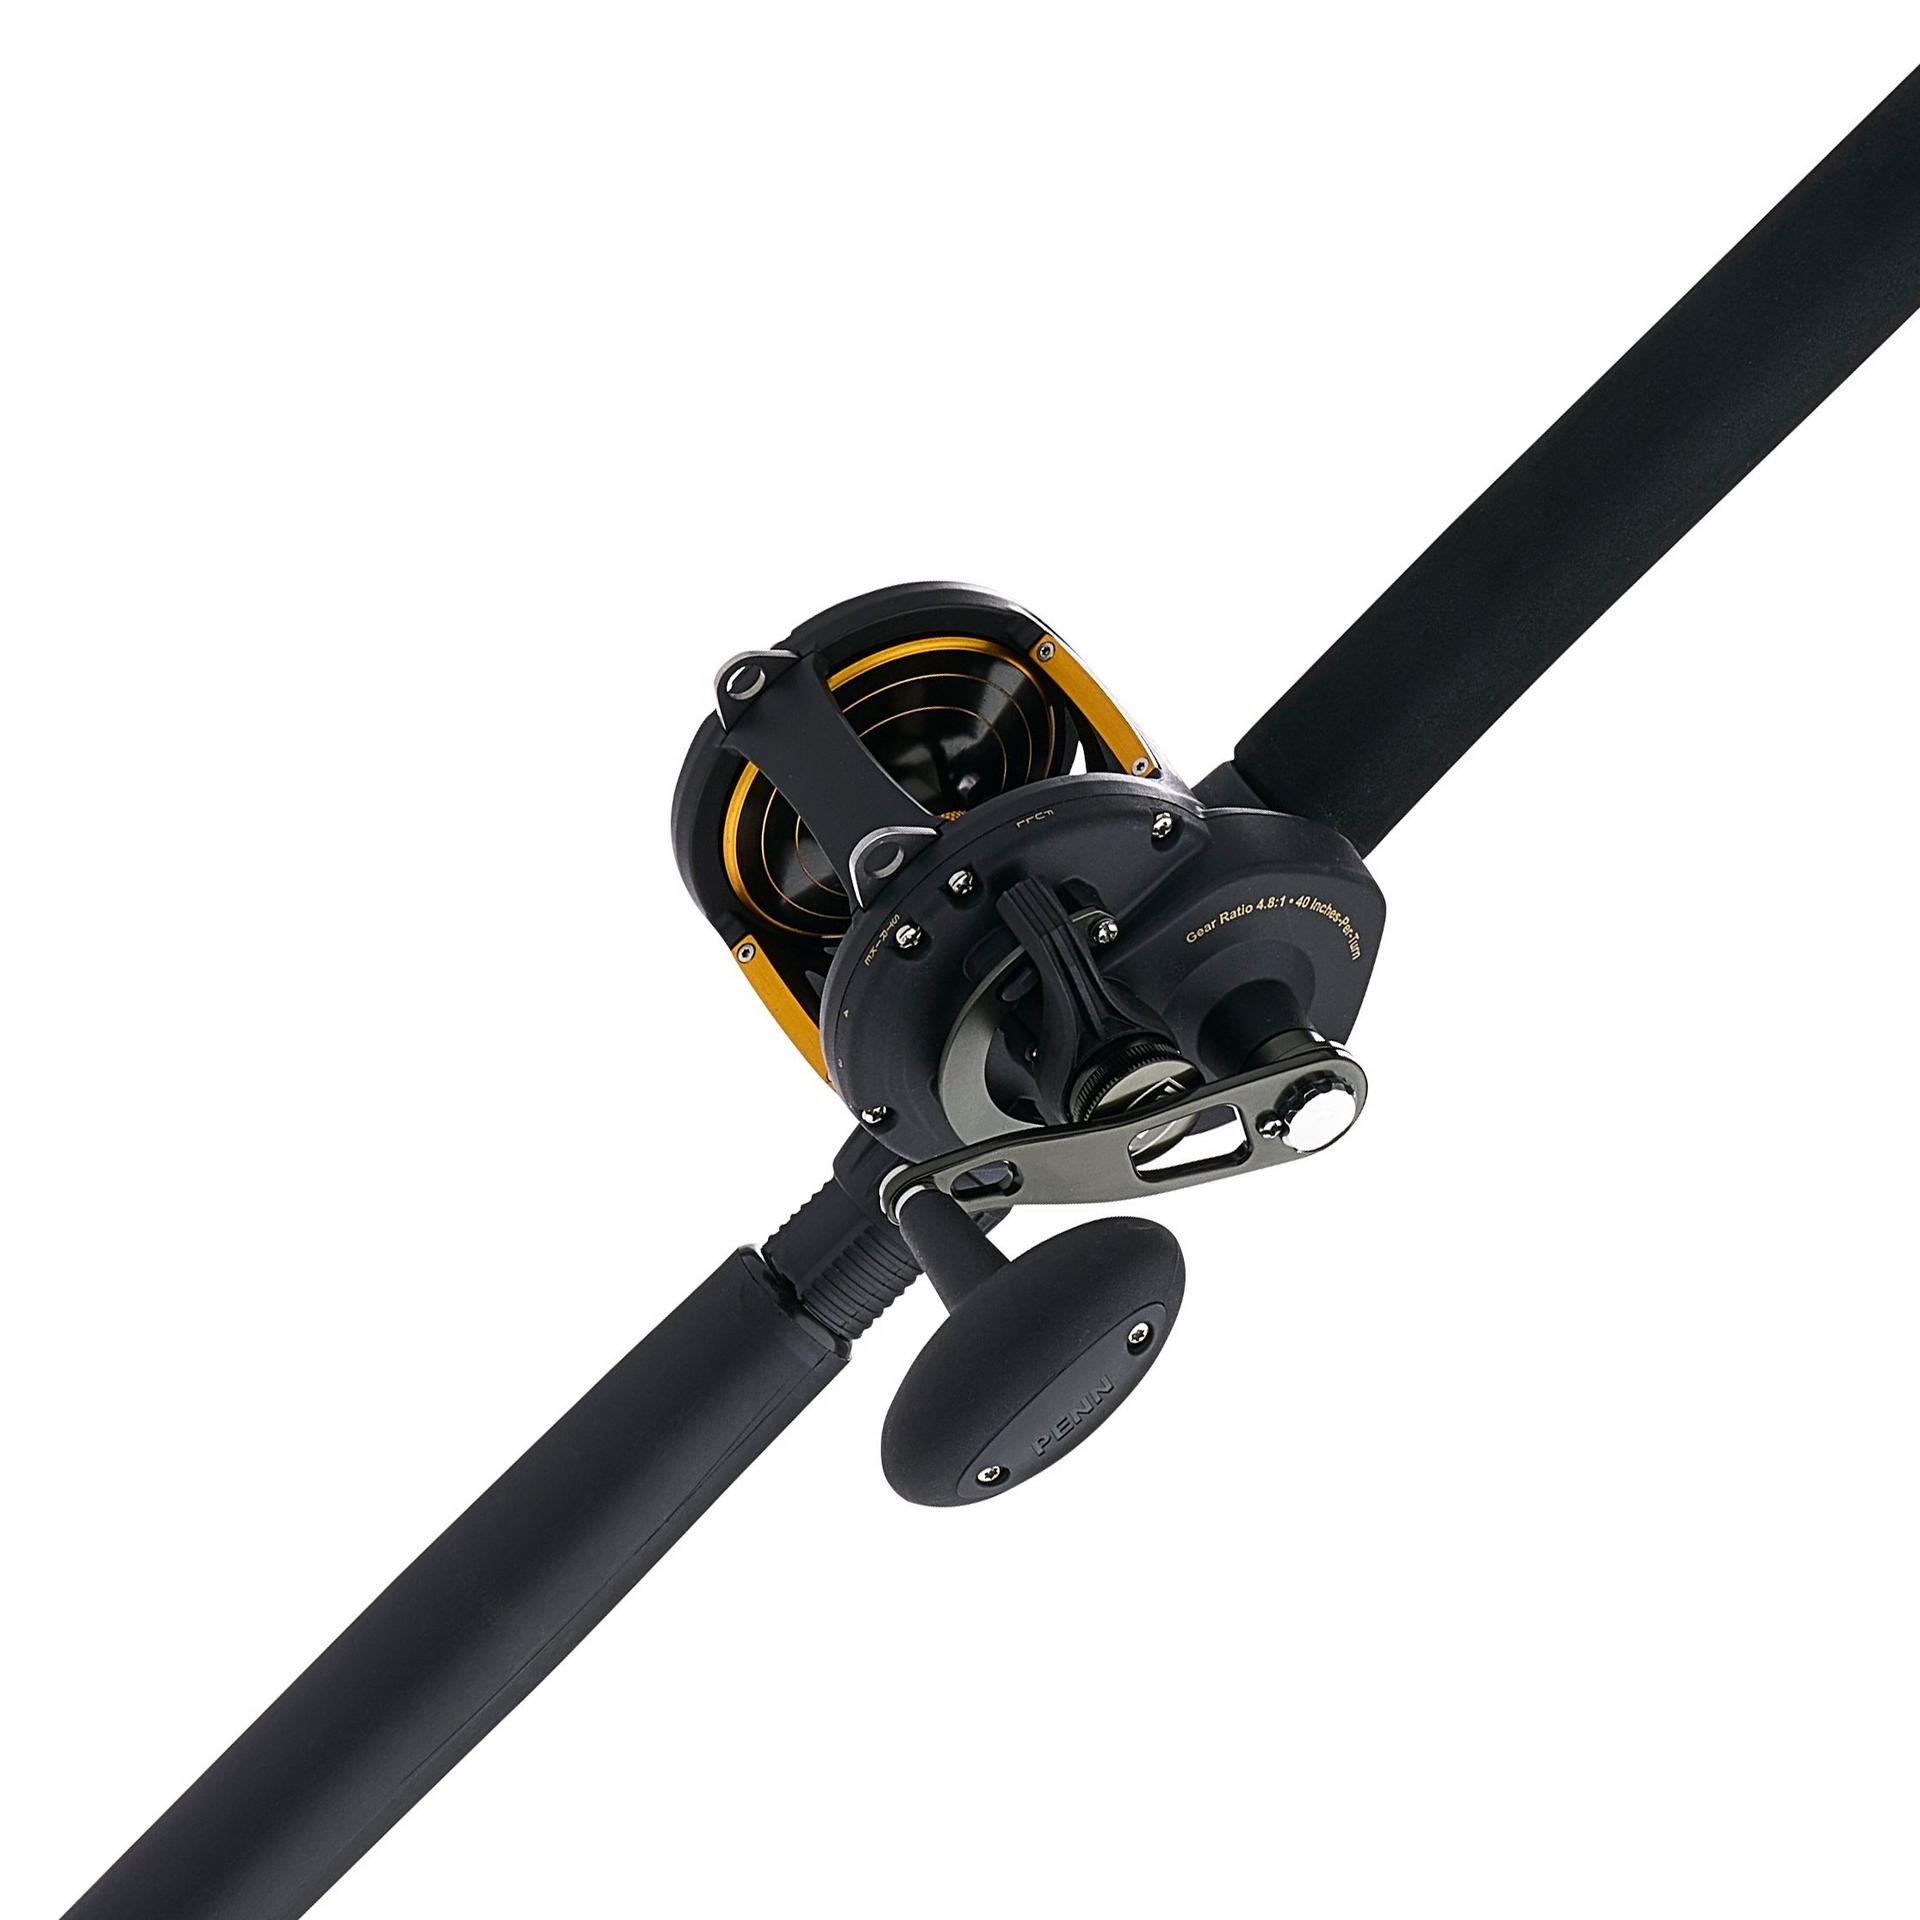 PENN Squall 30 and 40 Lever Drag Conventional Rod and Reel Combo - Model SQL30LD1530C70L